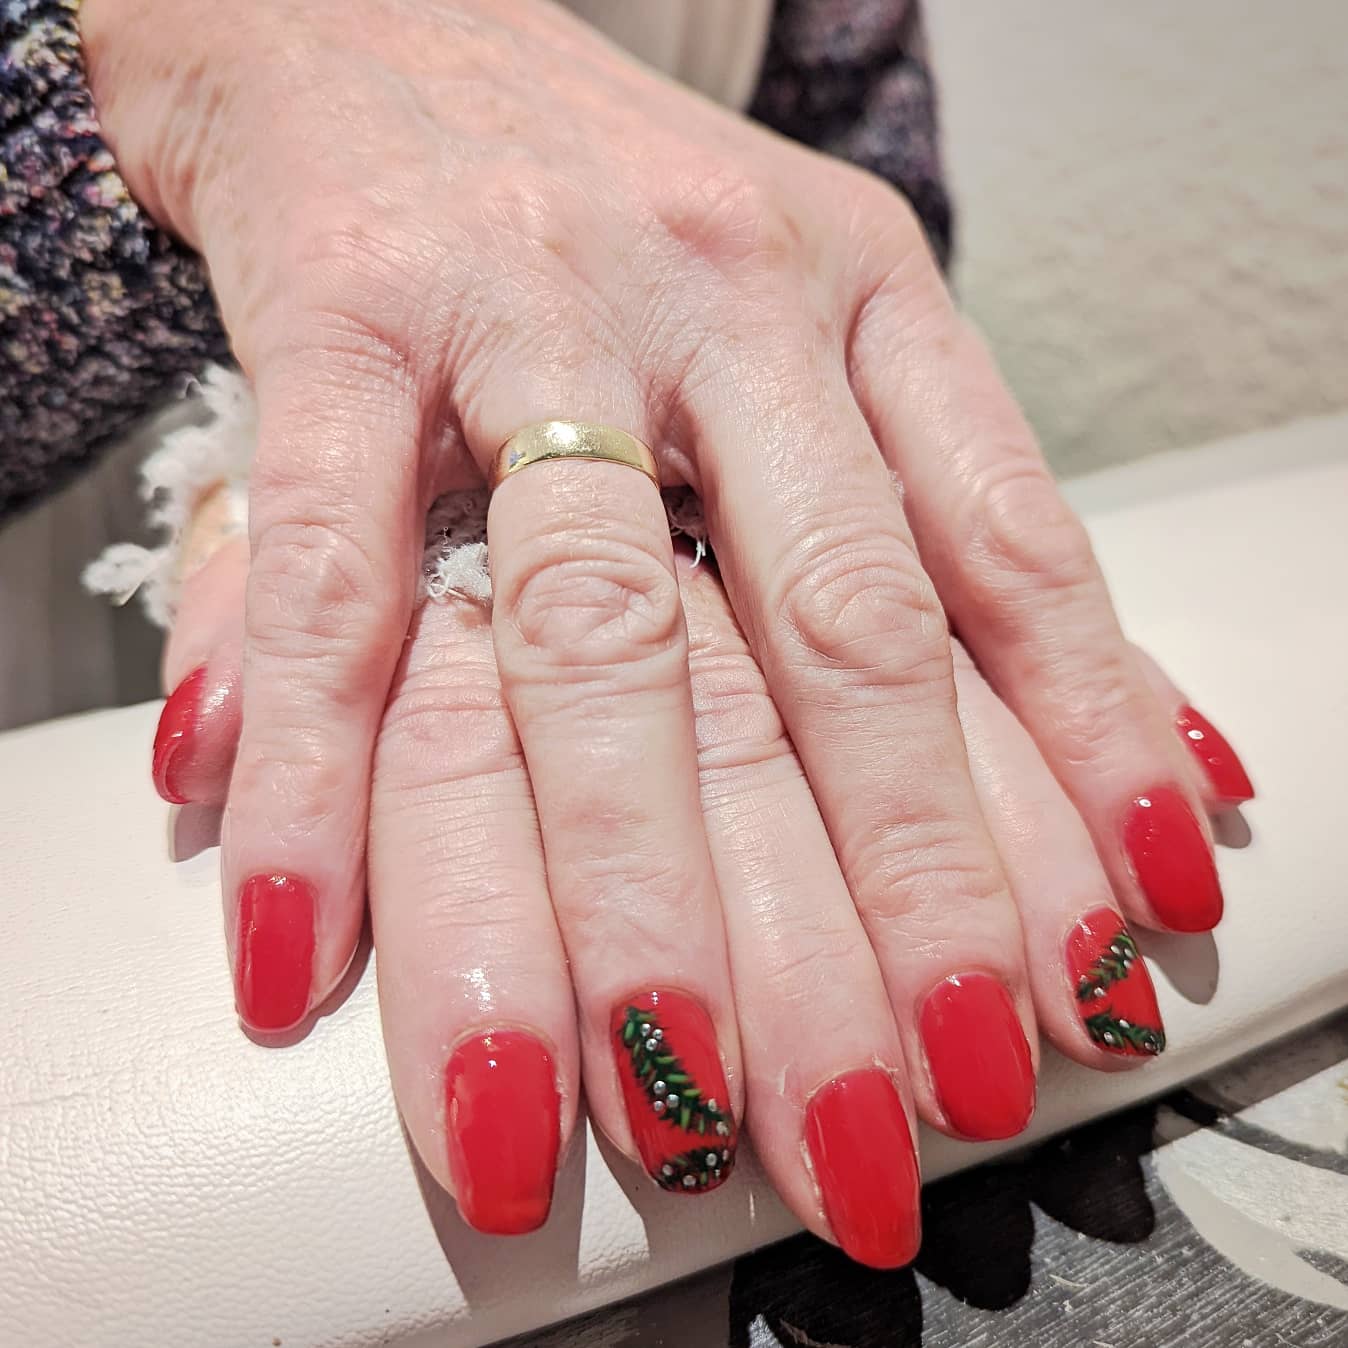 Pillarbox Red Bio Sculpture gel overlays, with hand-painted Christmas garland detail. Ginger Harmony - Nourishing vegan beauty in the heart of Oakham